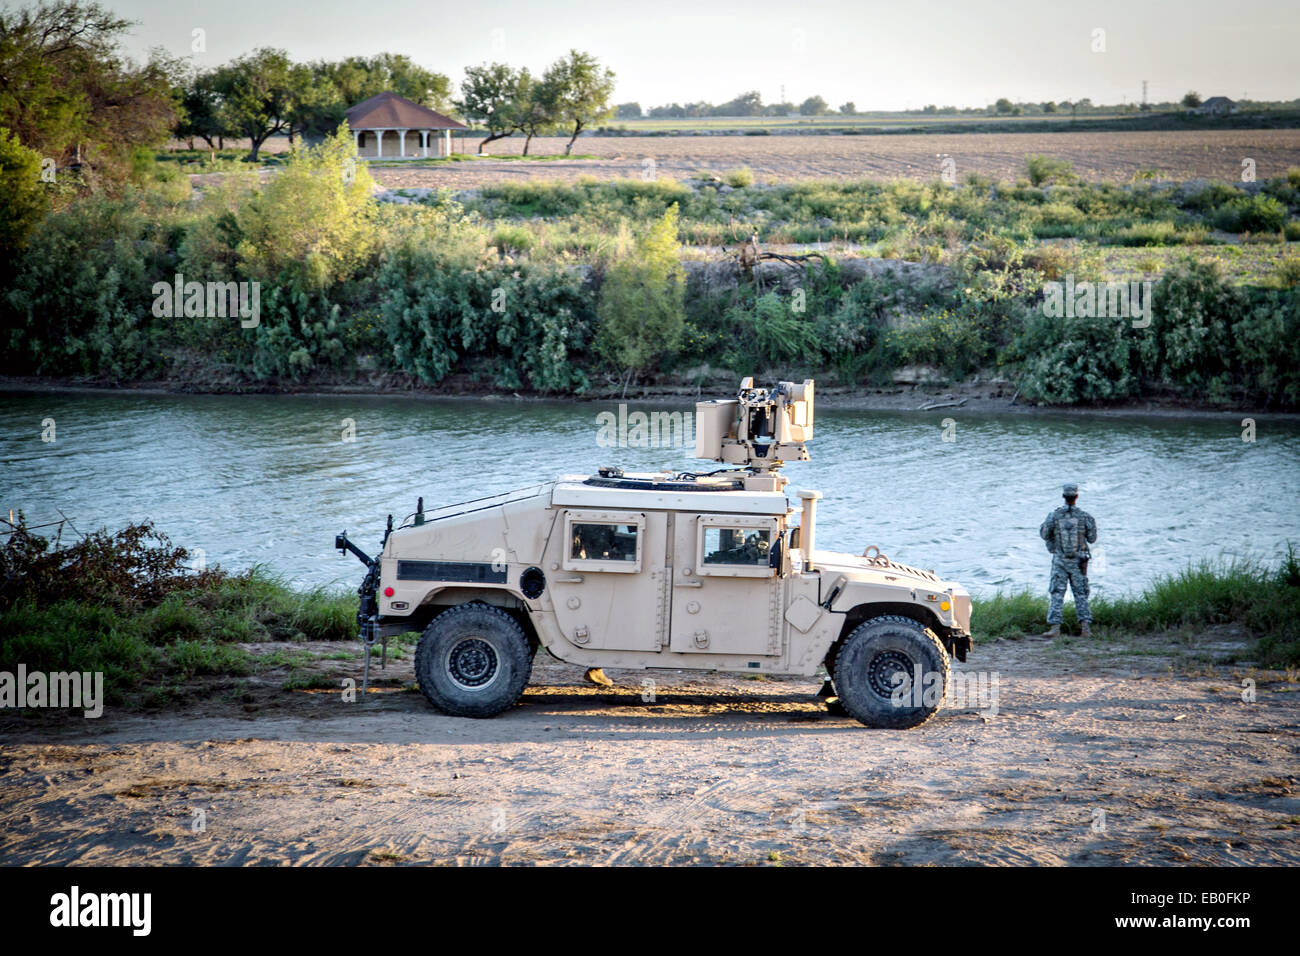 A soldier from the  Texas Army National Guard observes a section of the Rio Grande River along the Texas-Mexico border in support of Operation Strong Safety to assist in guarding the border September 11, 2014 in McAllen, Texas. Stock Photo